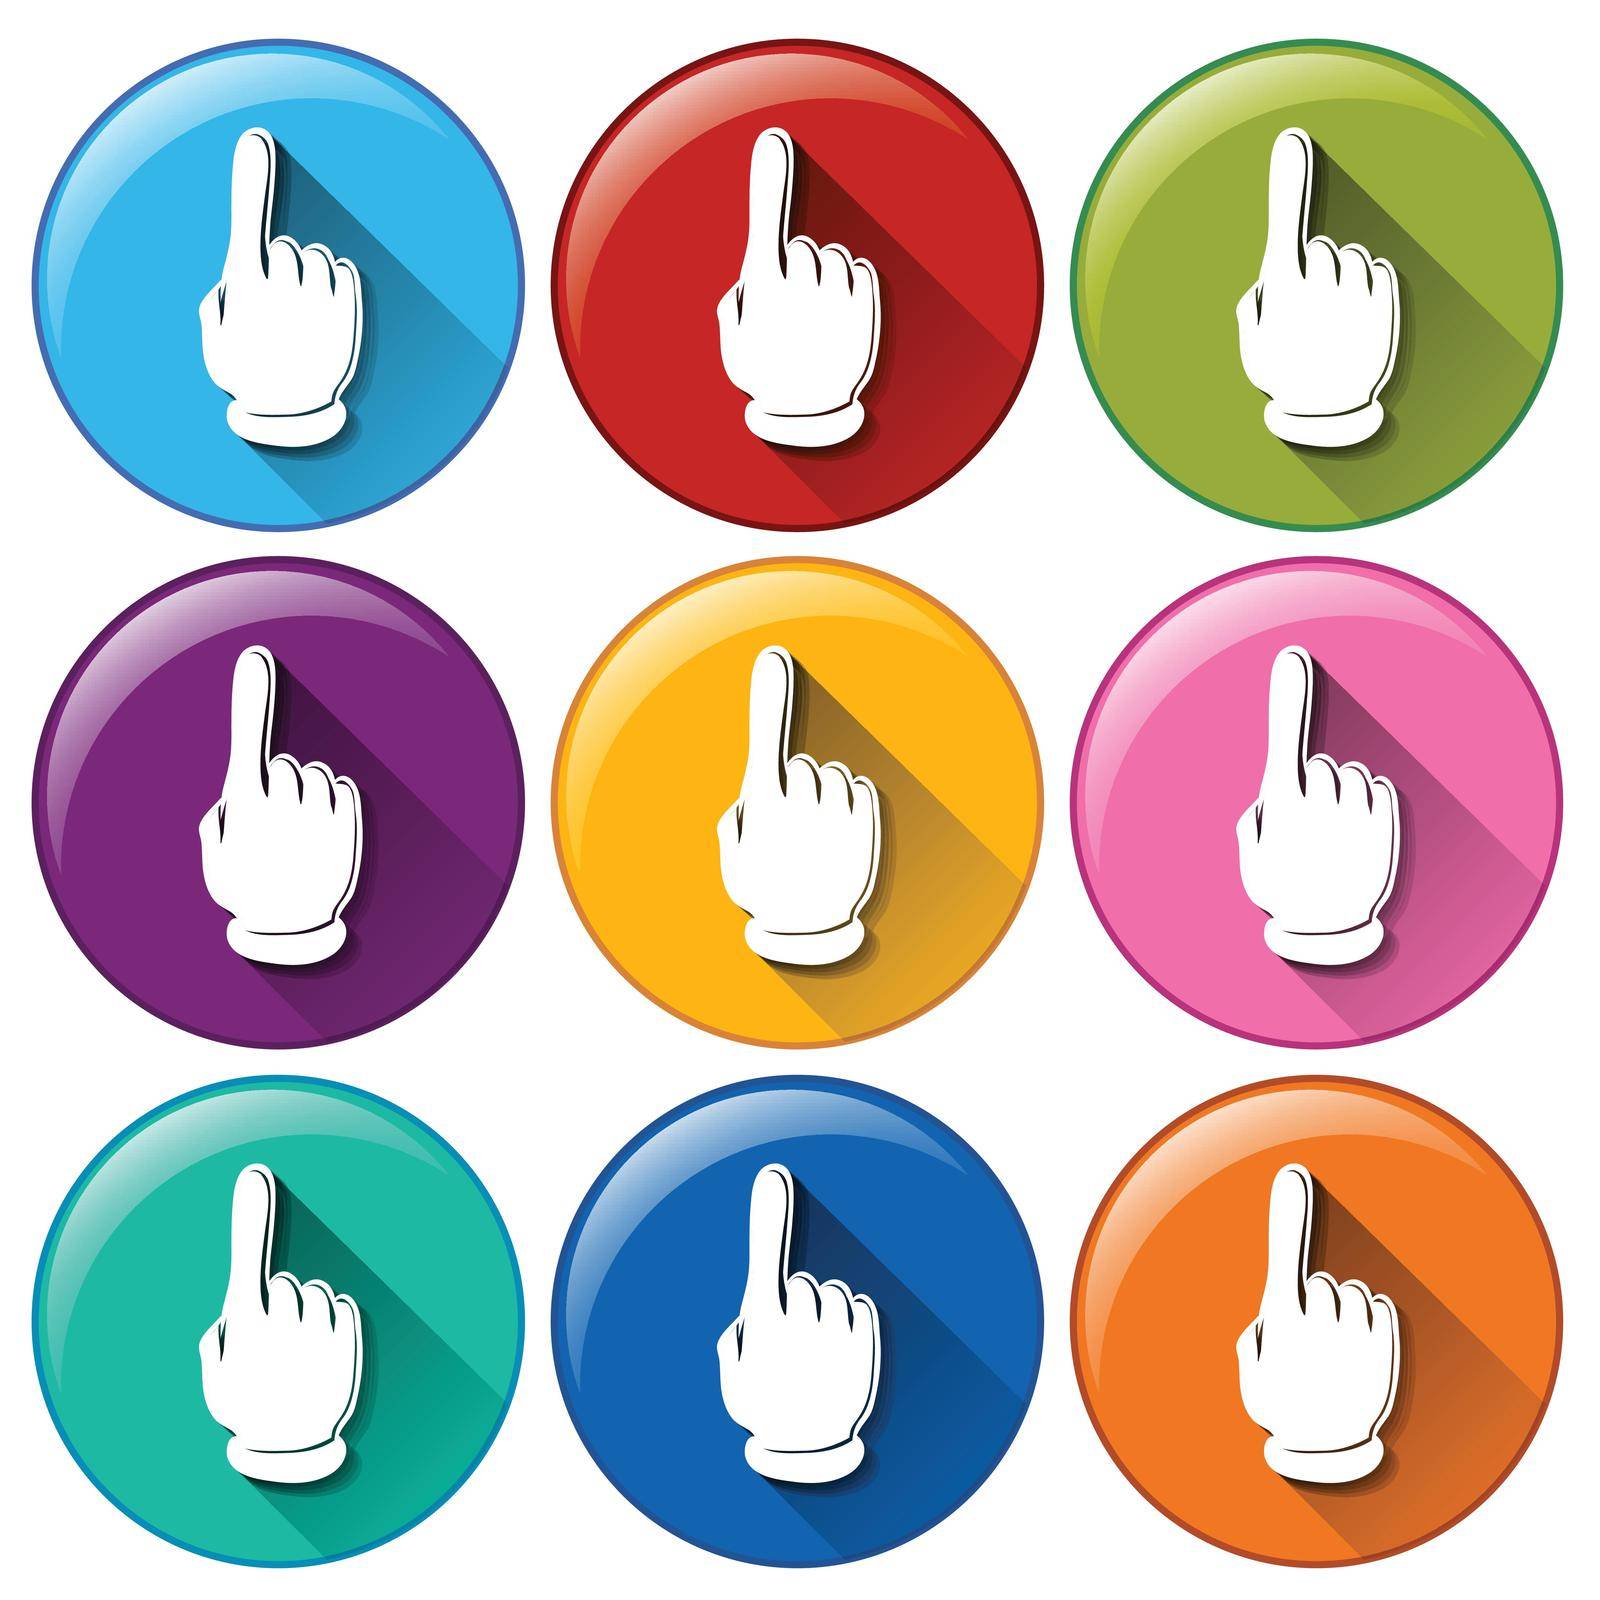 Buttons with fingers pointing upwards on a white background